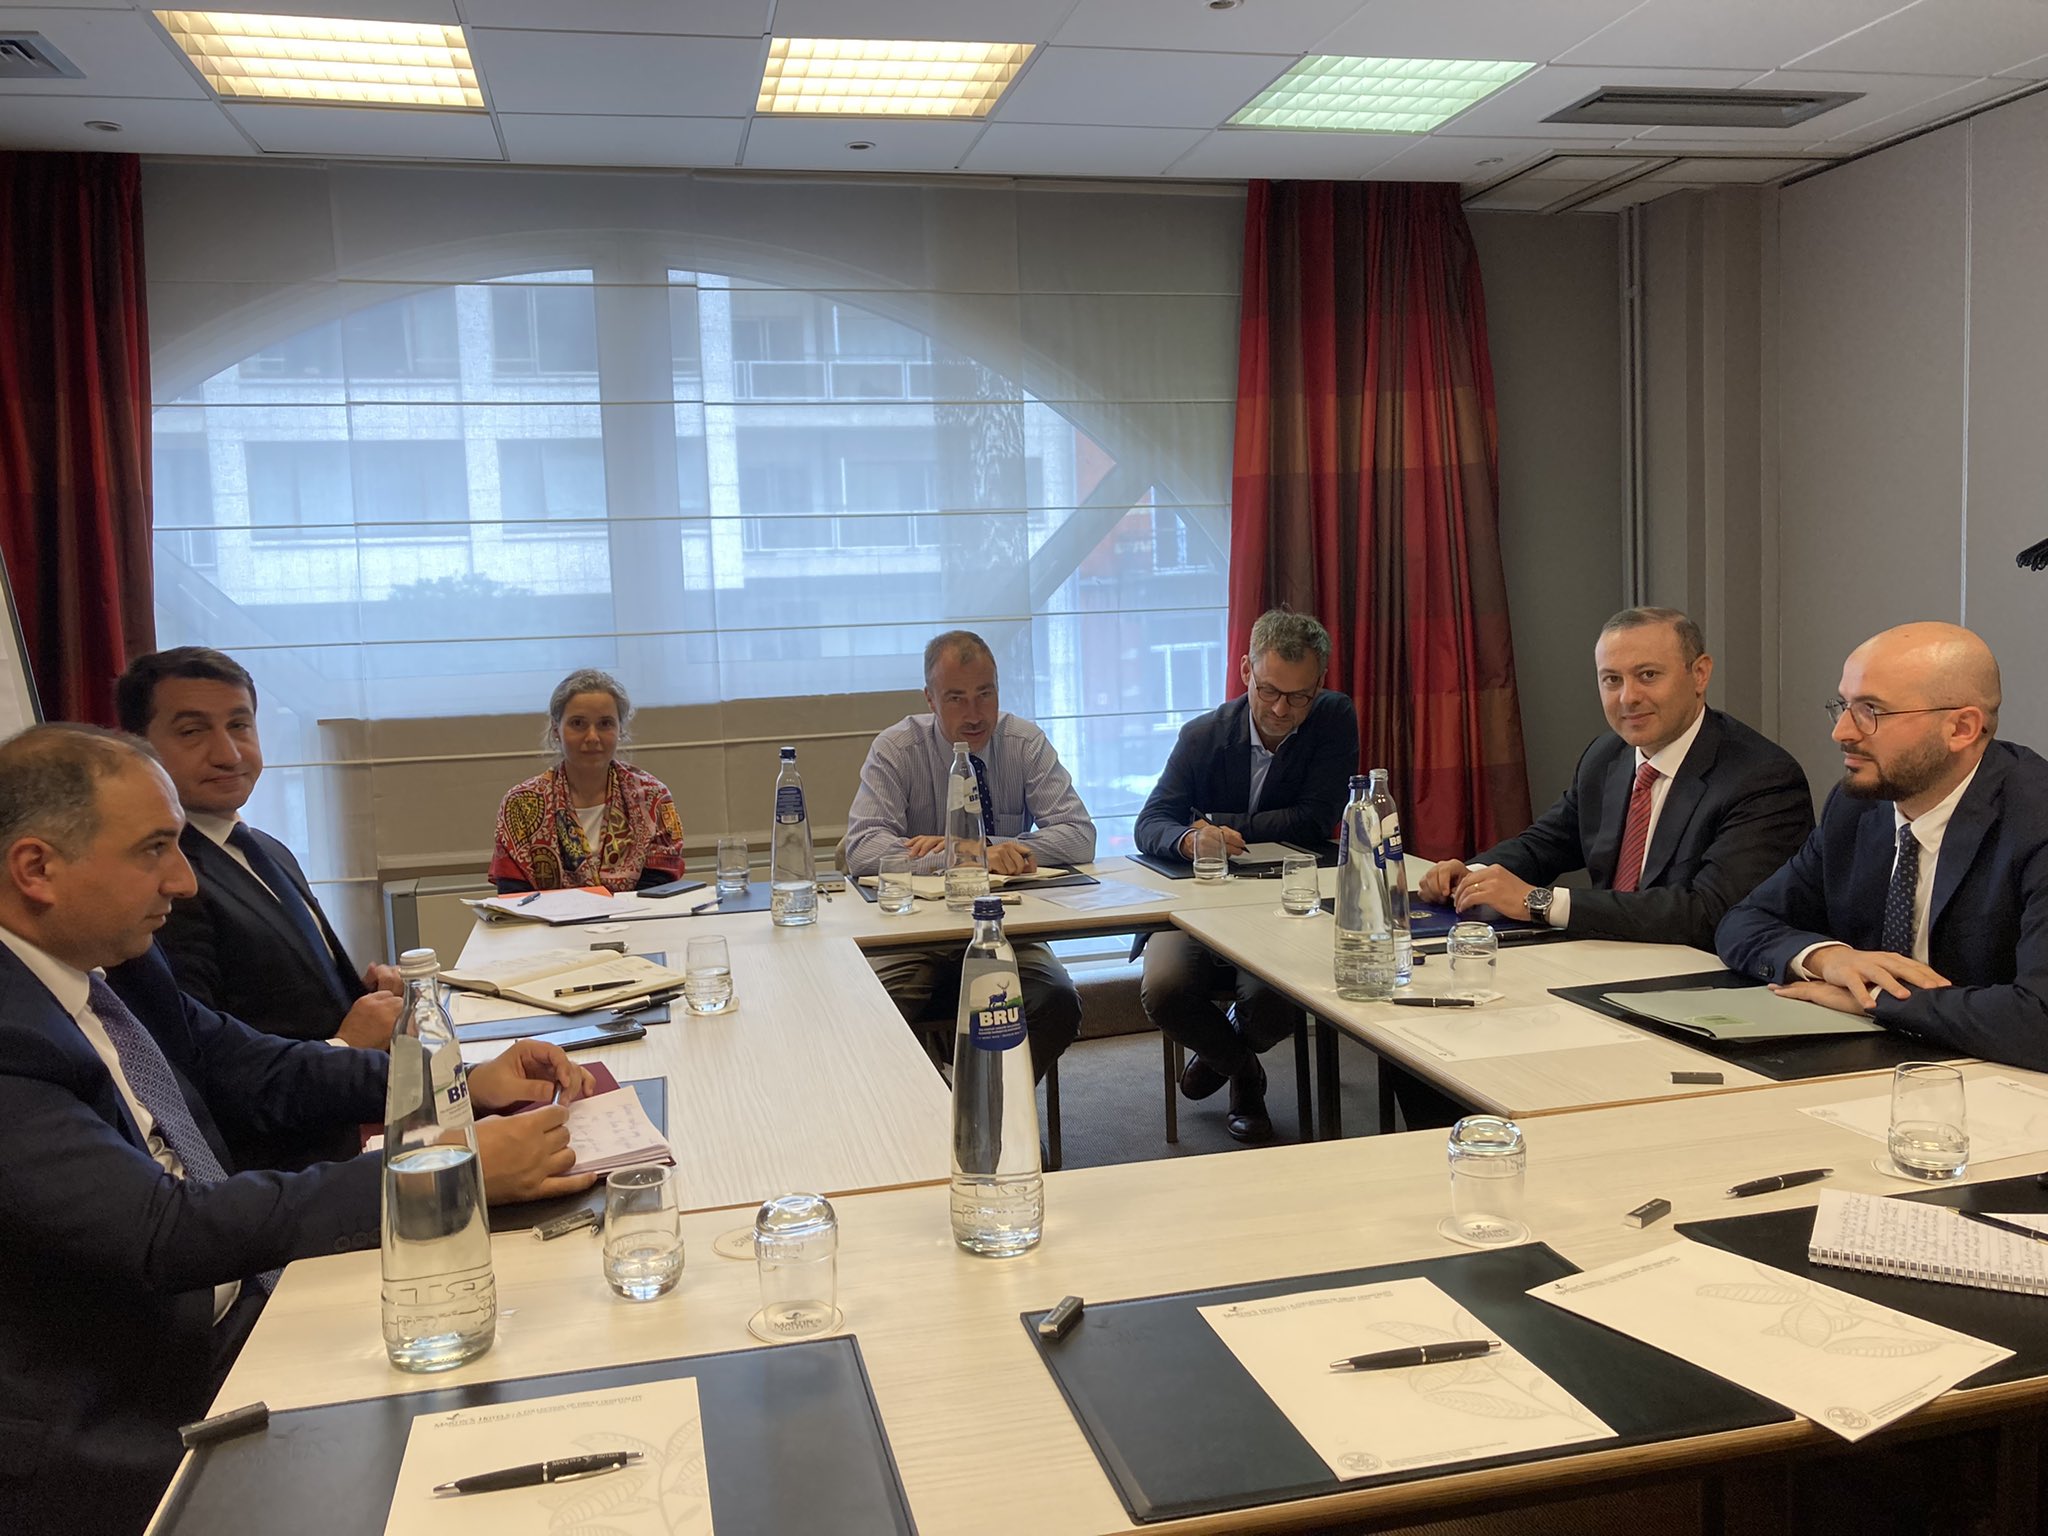 Toivo Klaar: Good and substantive discussions in Brussels today